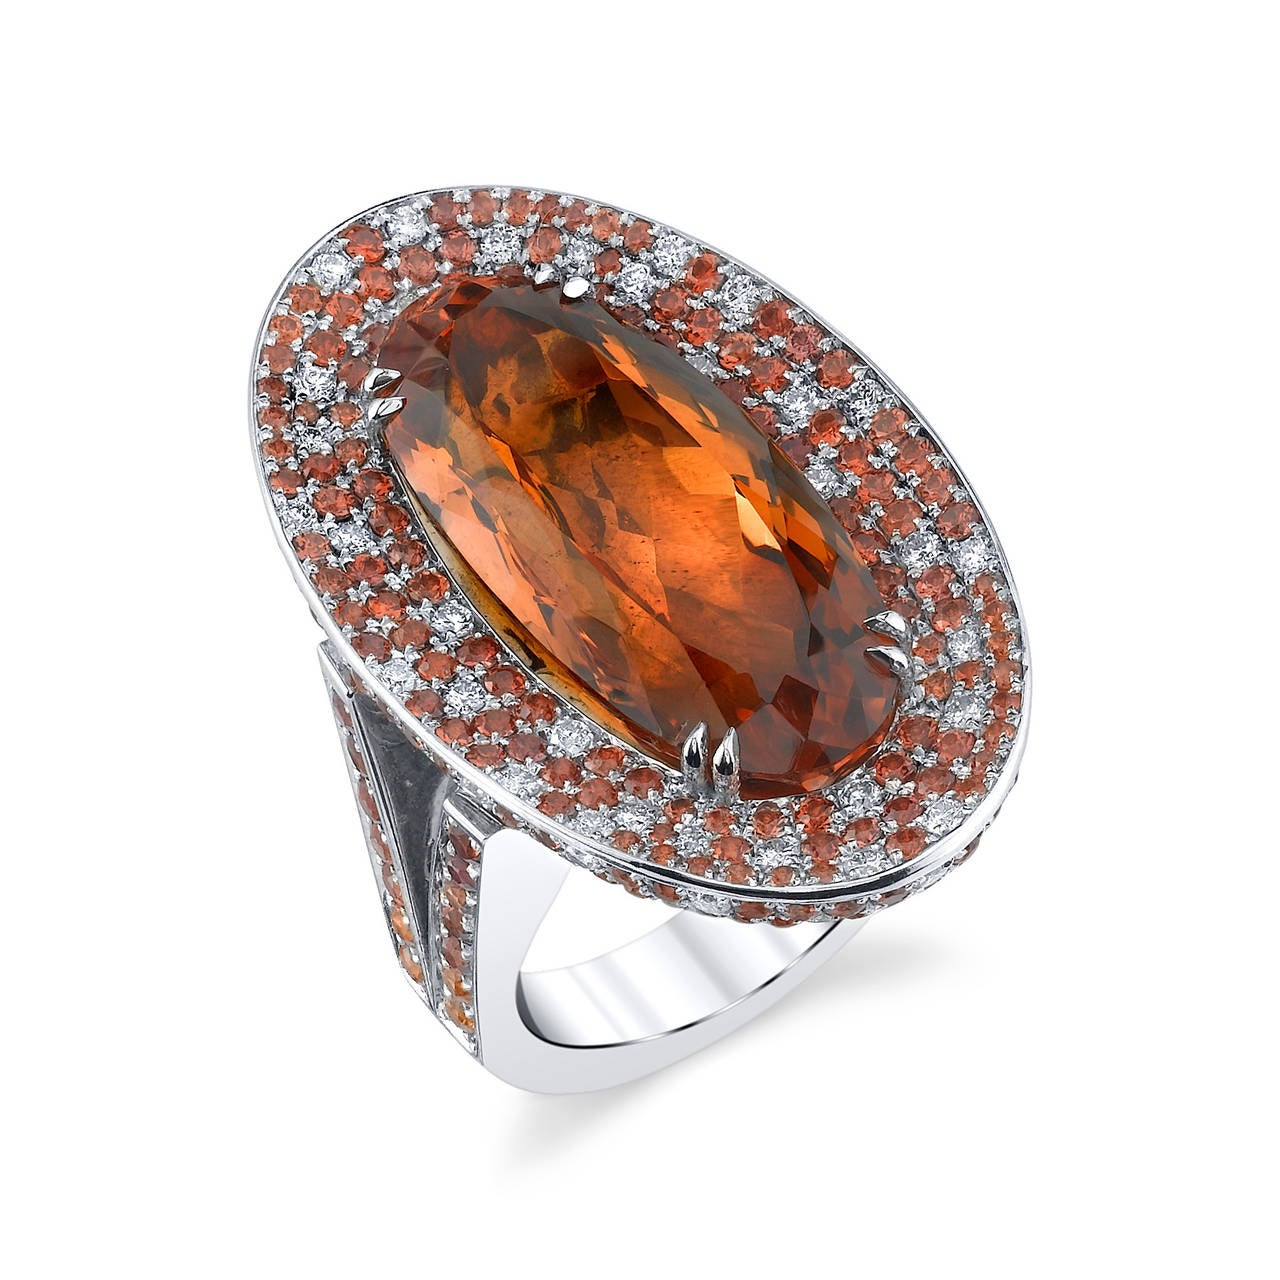 Precious Imperial Topaz set in 18 Karat White Gold, accented with White Diamonds and Orange Sapphires. GIA Certified Center Stone with a Total Weight of 21.99CT. White Diamond Quality F/VS2 with a Total Weight of 1.97CT. Orange Sapphire Weight of